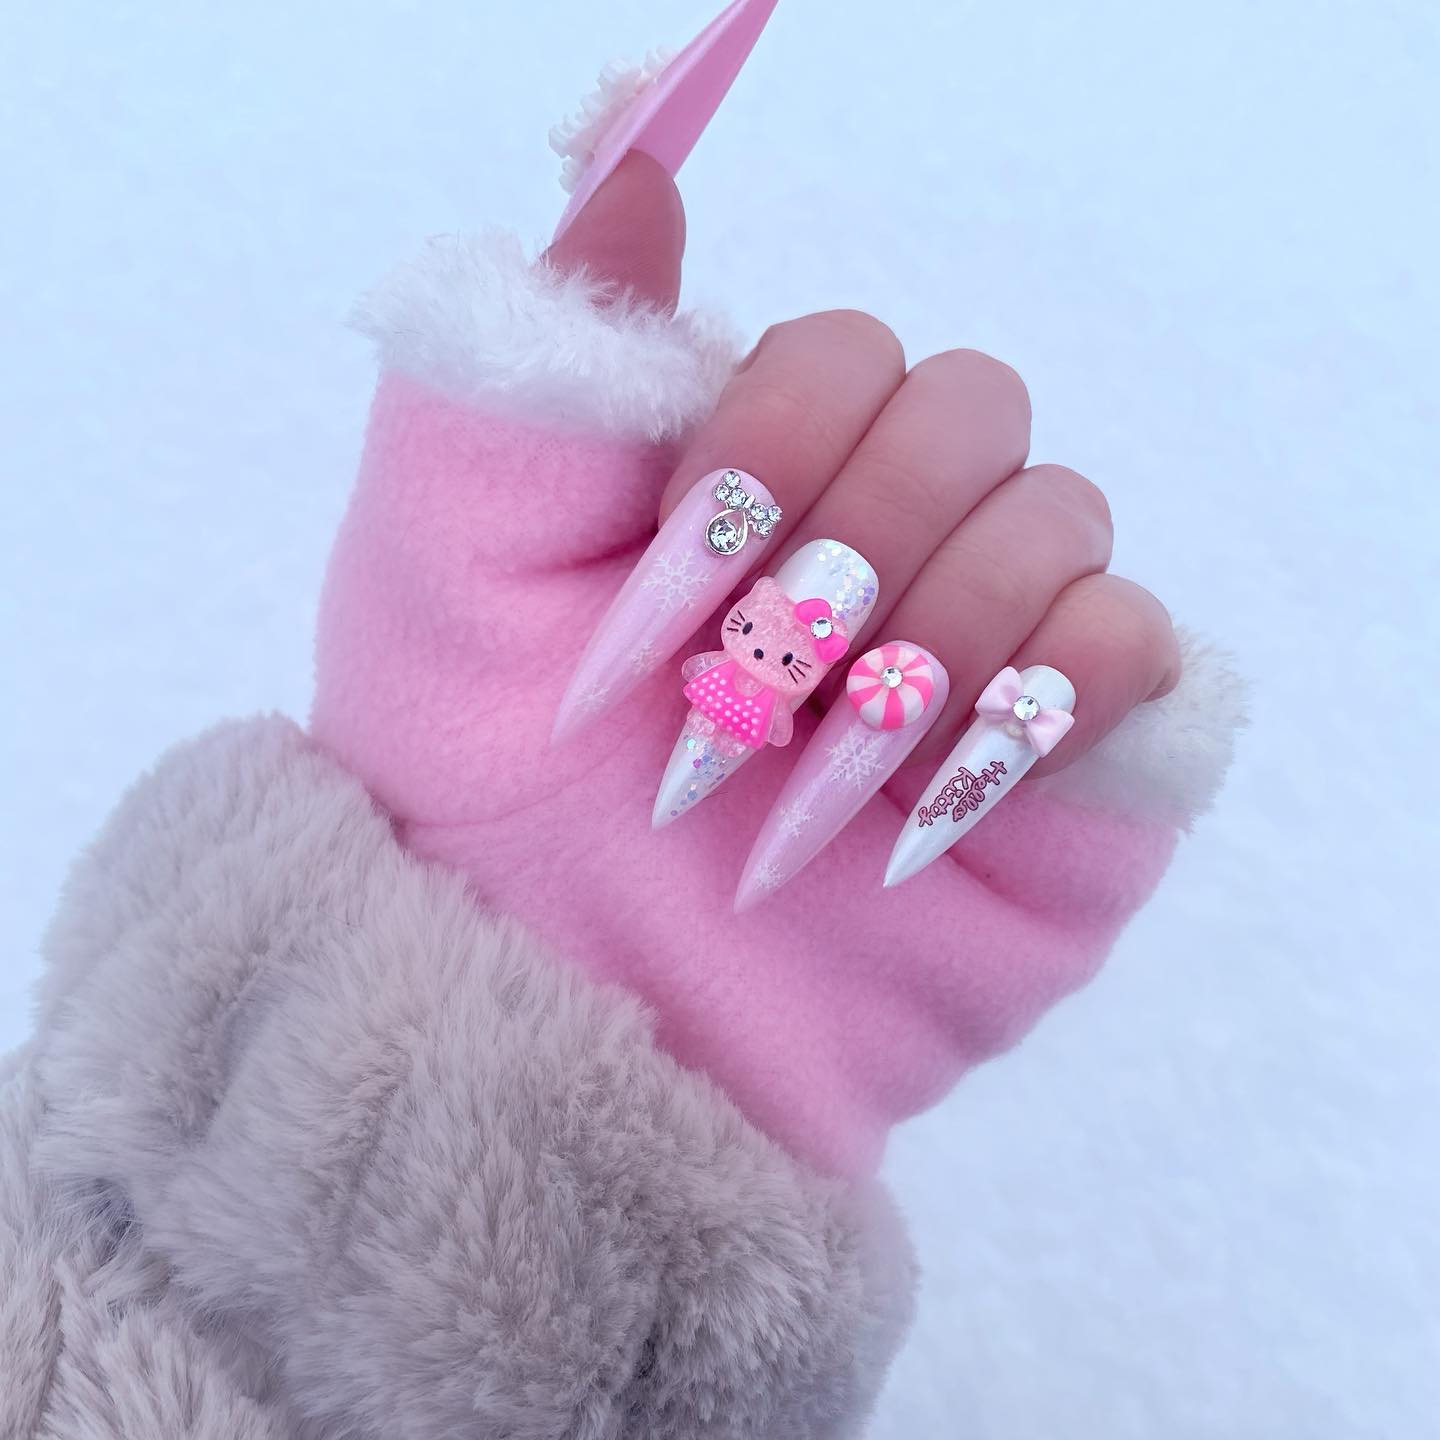 Pink Acrylic Nails with White Snowflakes